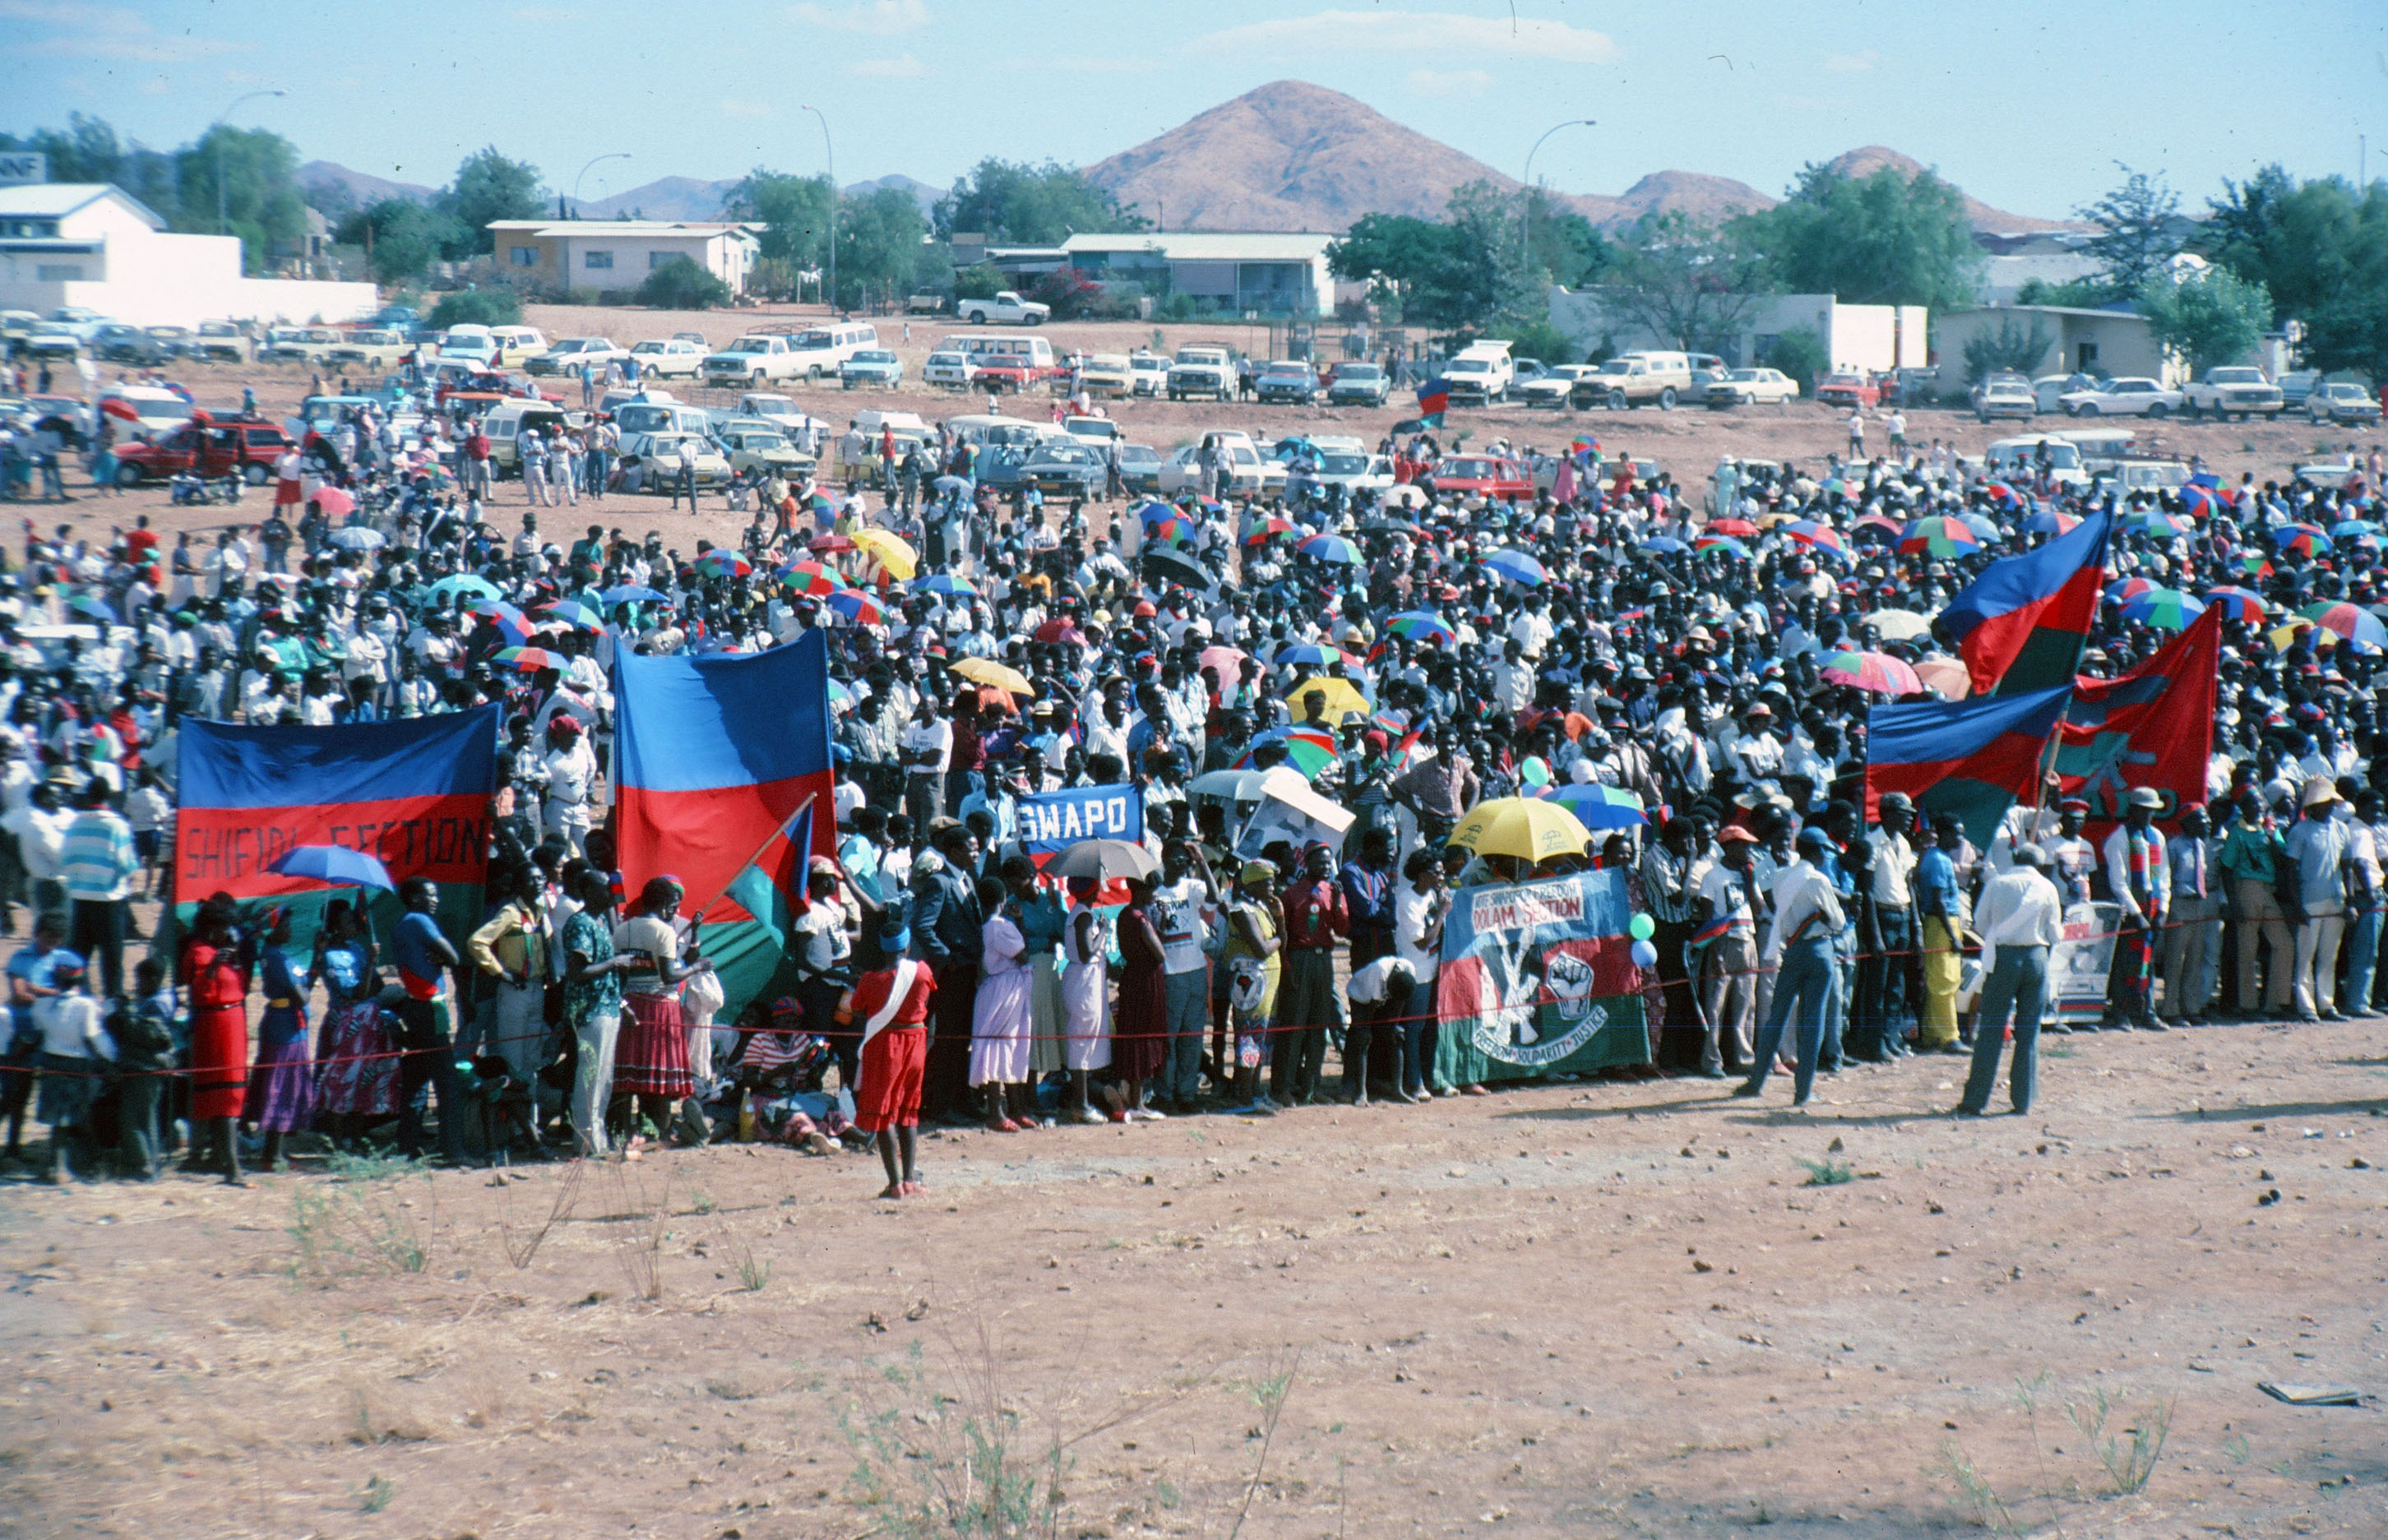 South West Africa People’s Organization (SWAPO) rally crowd